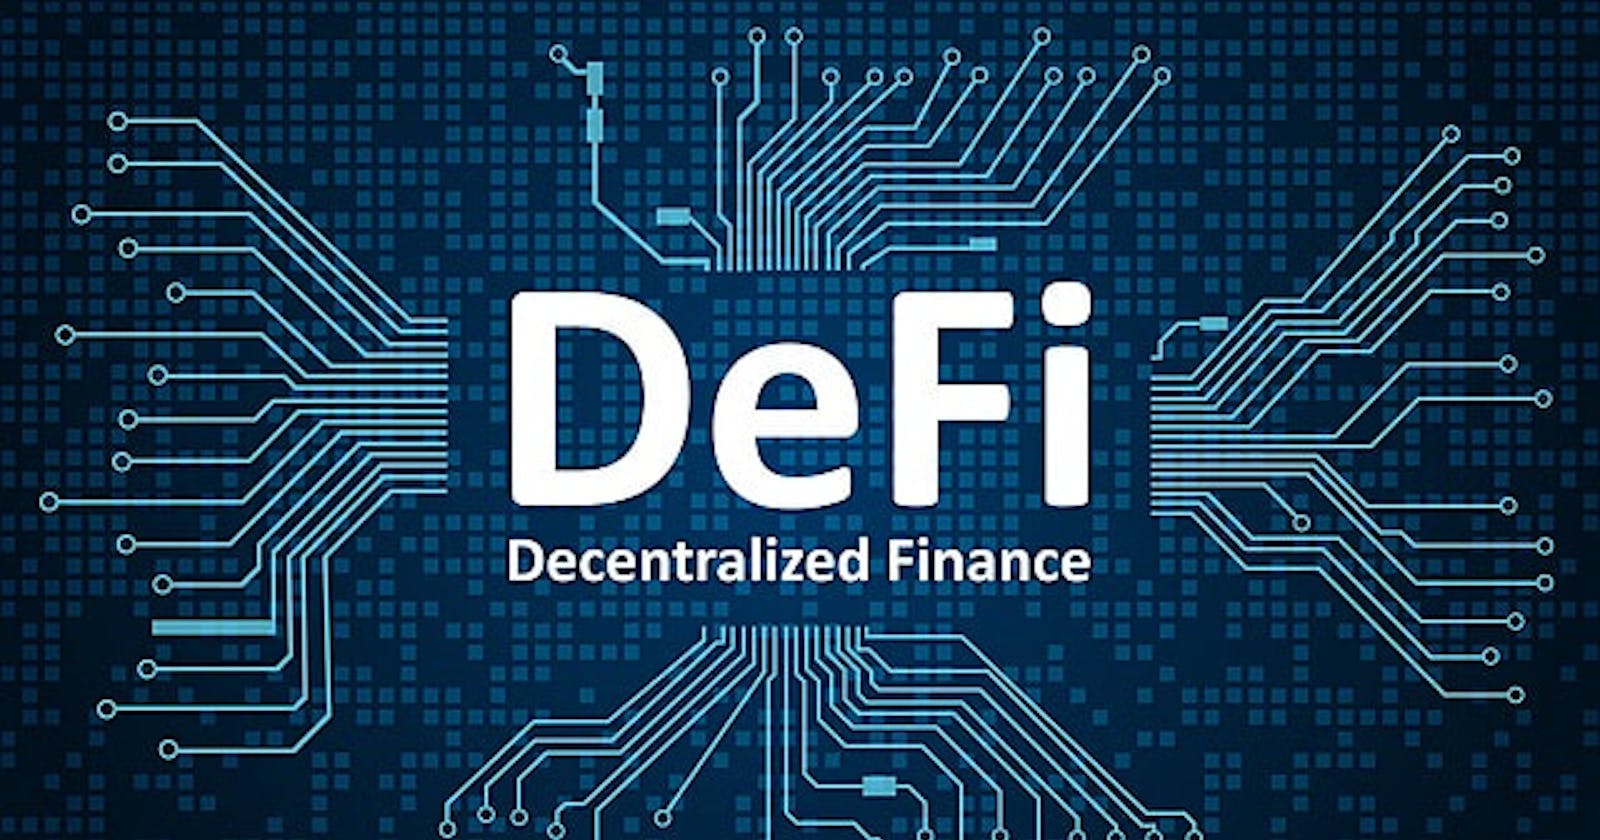 THE FUTURE OF DECENTRALIZED FINANCE (Defi) AND THE POTENTIAL IMPACT ON TRADITIONAL FINANCIAL SYSTEMS AND THE GLOBAL ECONOMY